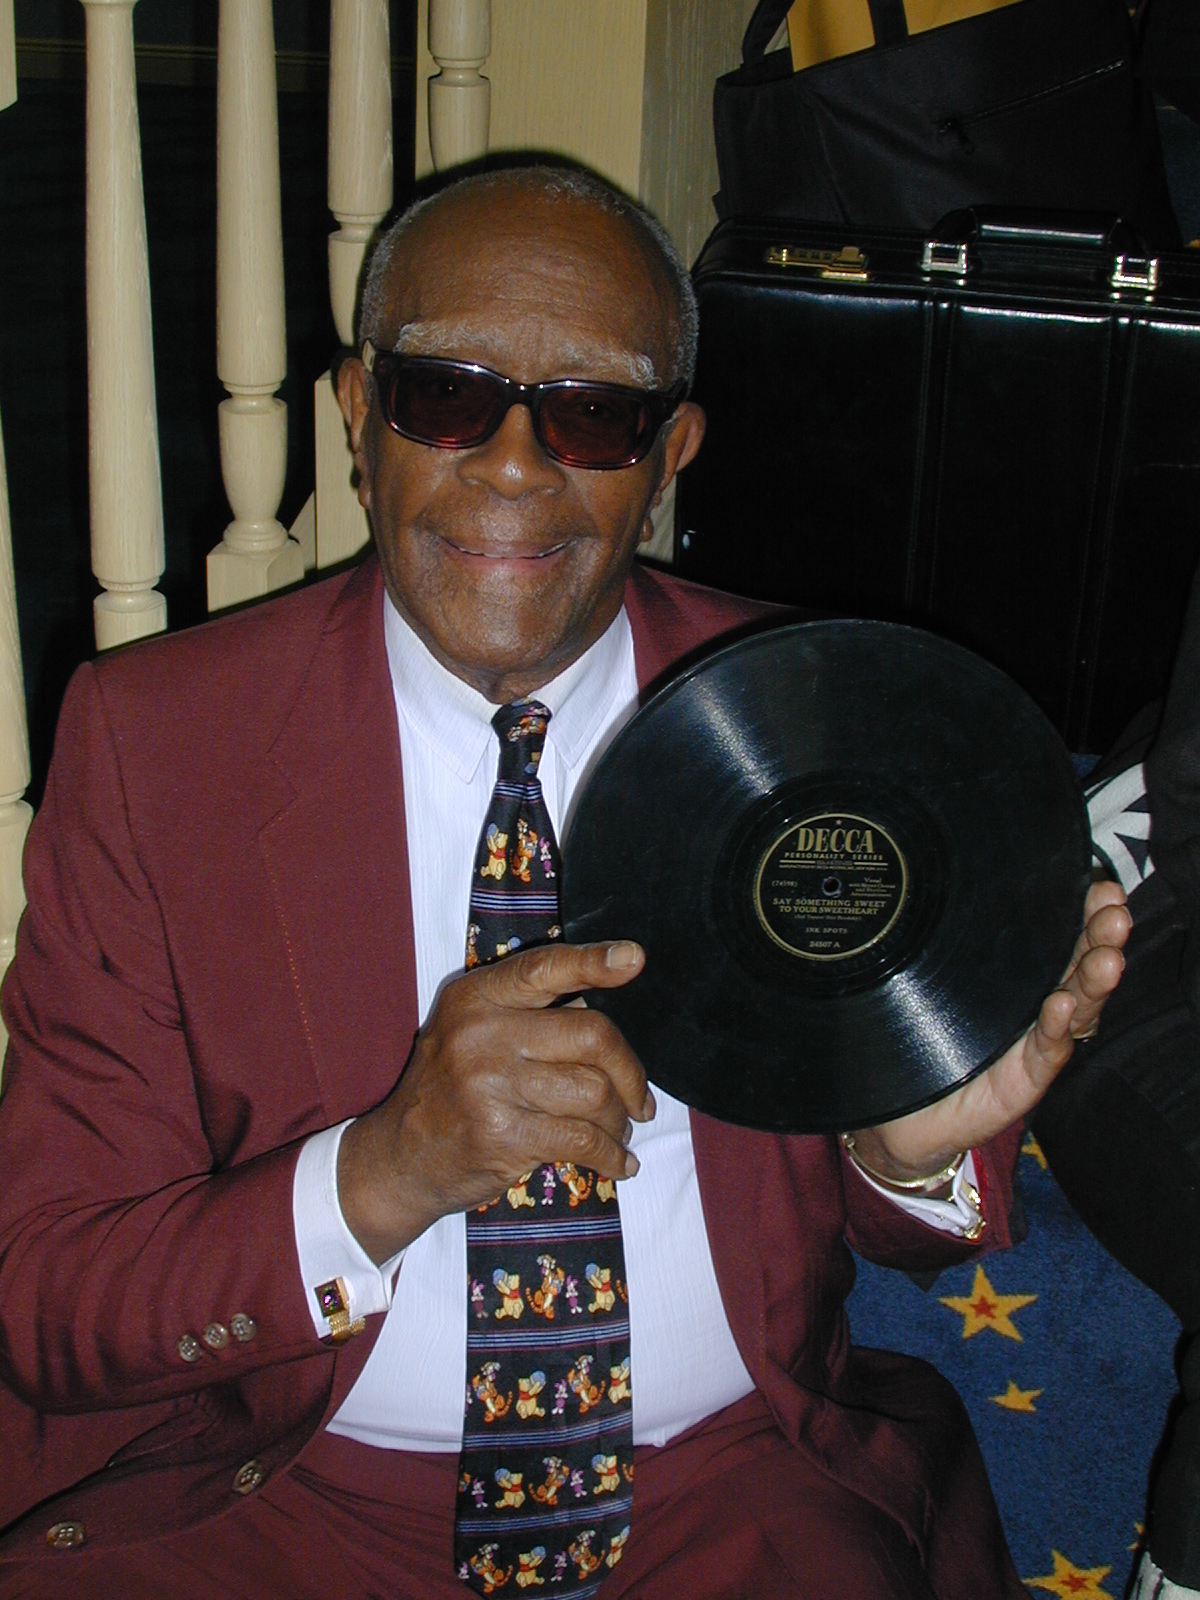 Harold Jackson the last surviving member of The Ink Spots at The Vocal Group Hall of Fame Induction Ceremony.